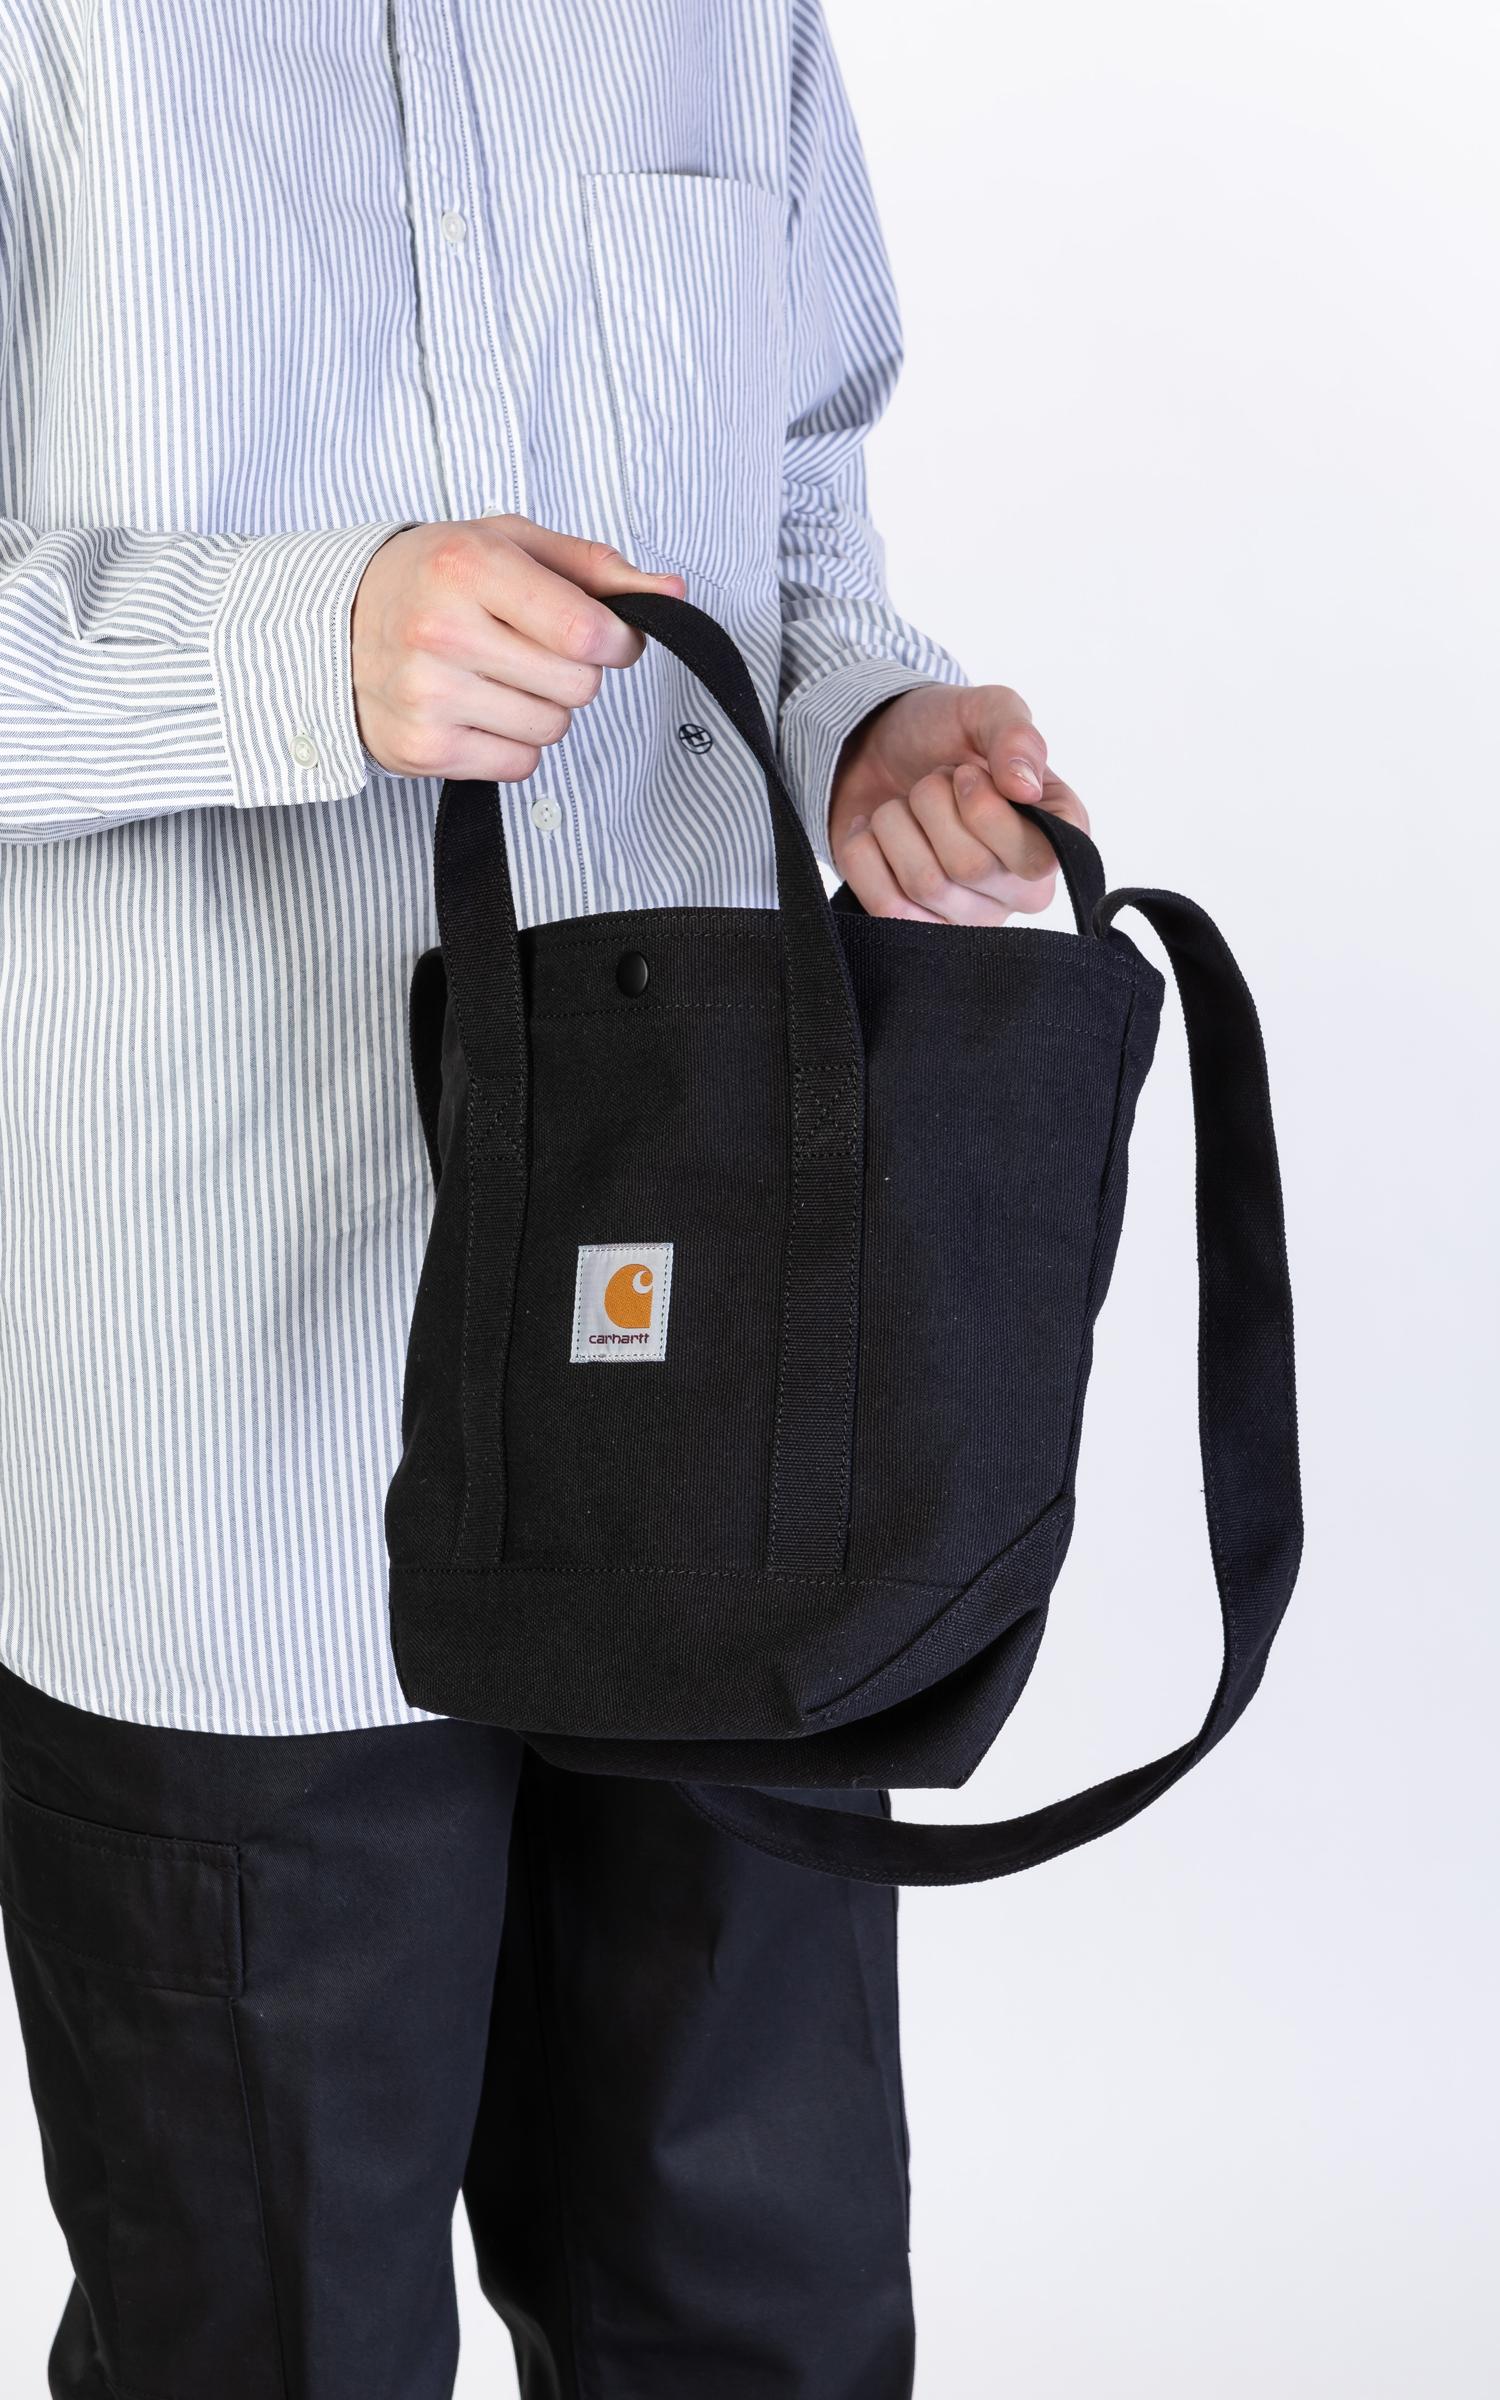 Carhartt WIP Canvas Small Tote Black/black for Men - Lyst